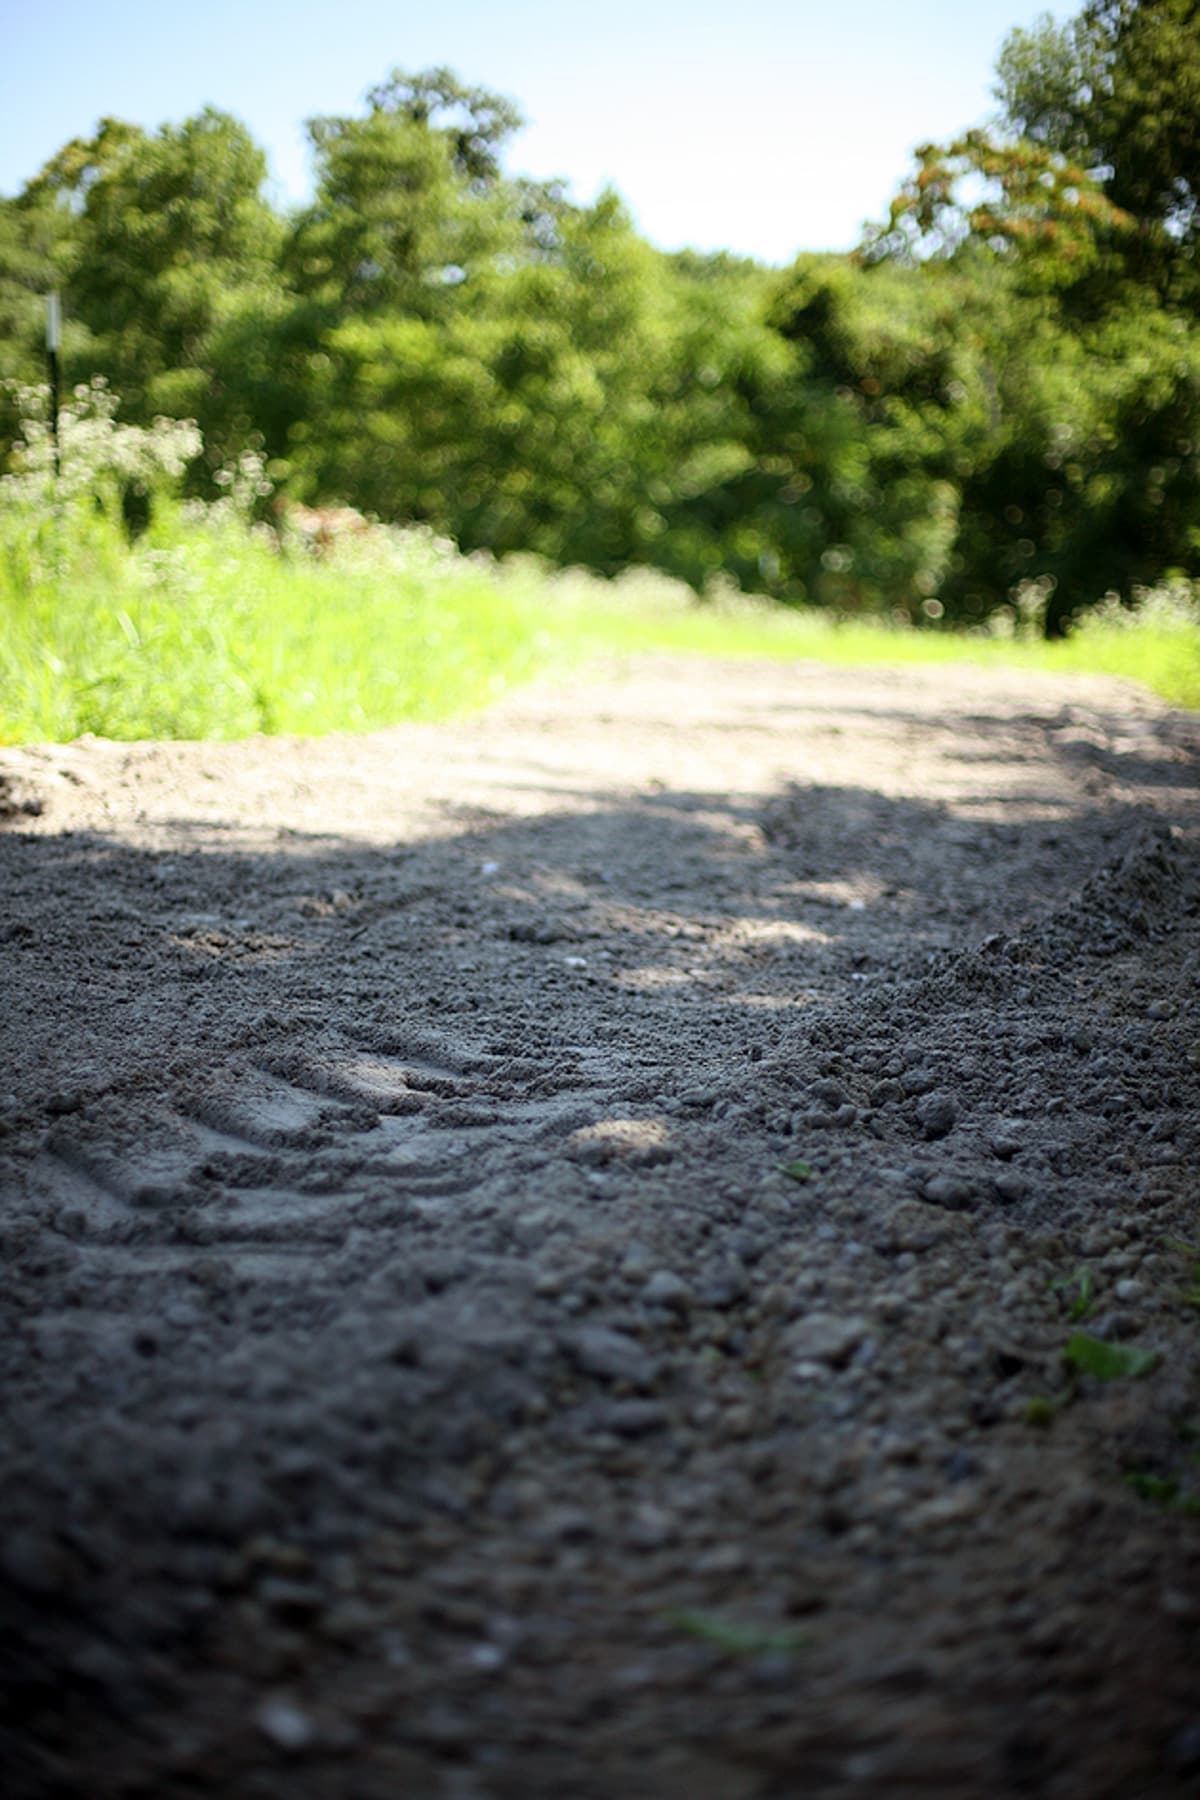 a view of the crushed concrete driveway at the farm